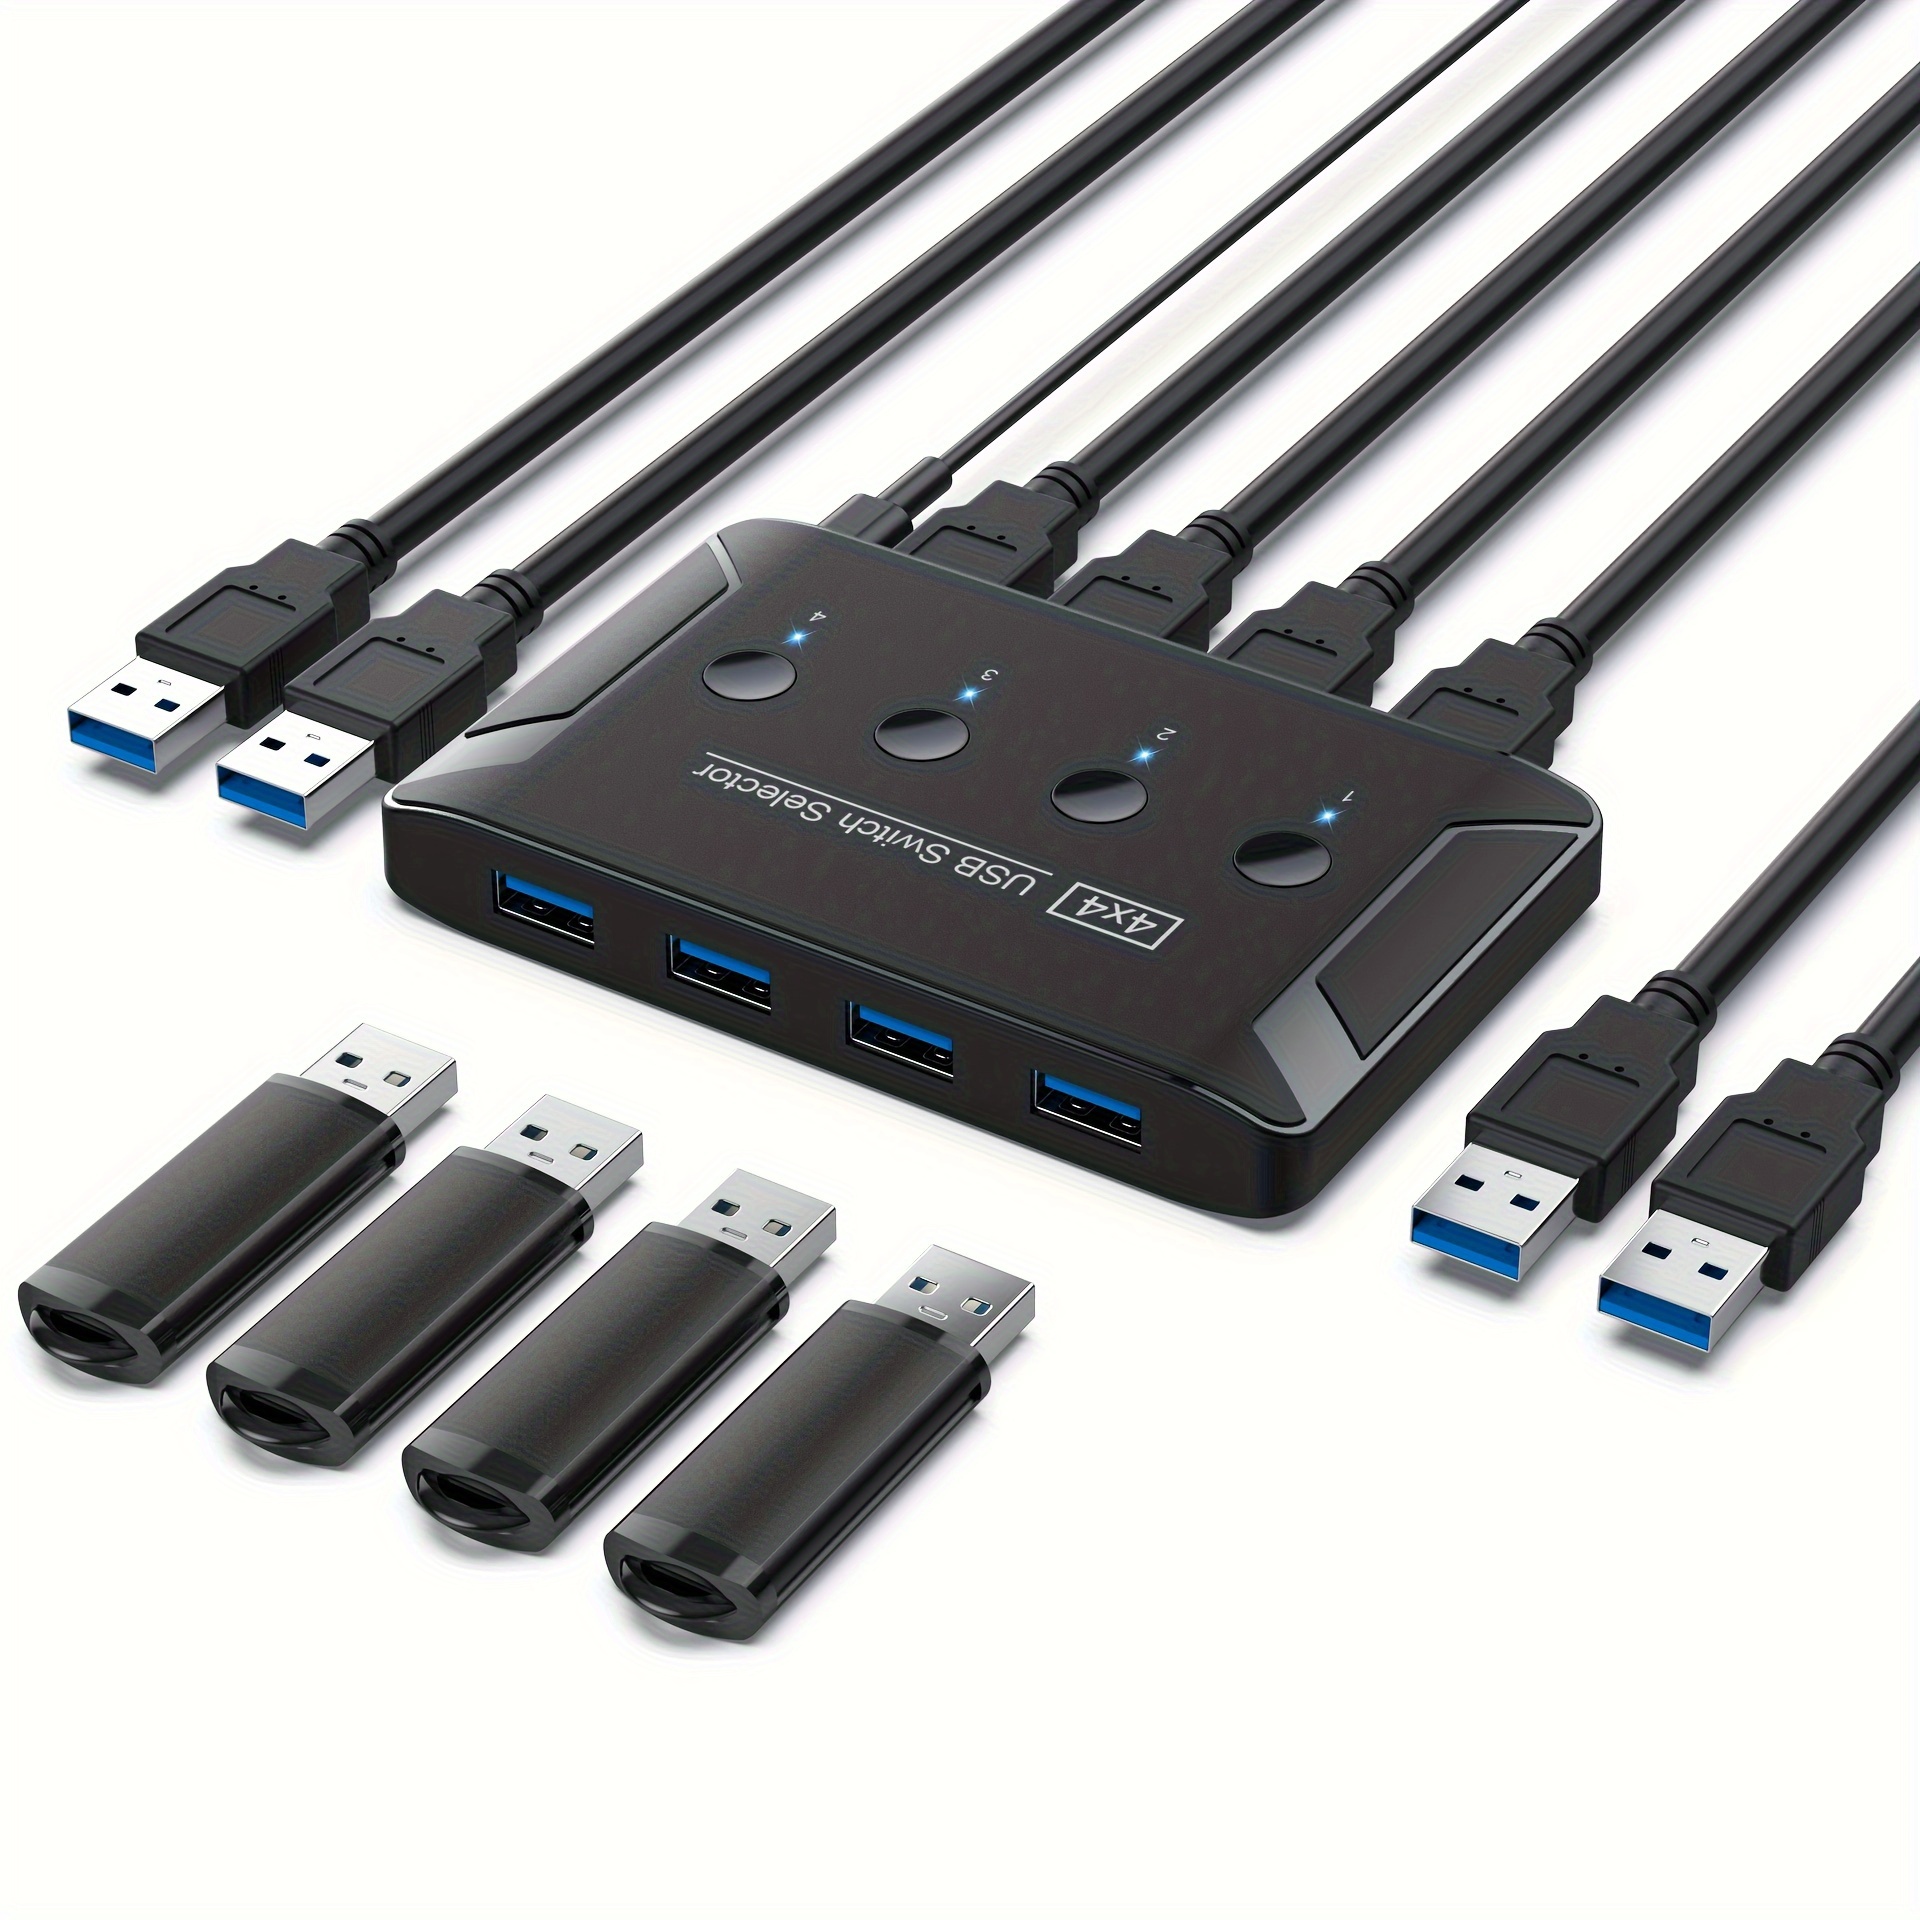 4 to 4 USB 3.0 Peripheral Sharing Switch